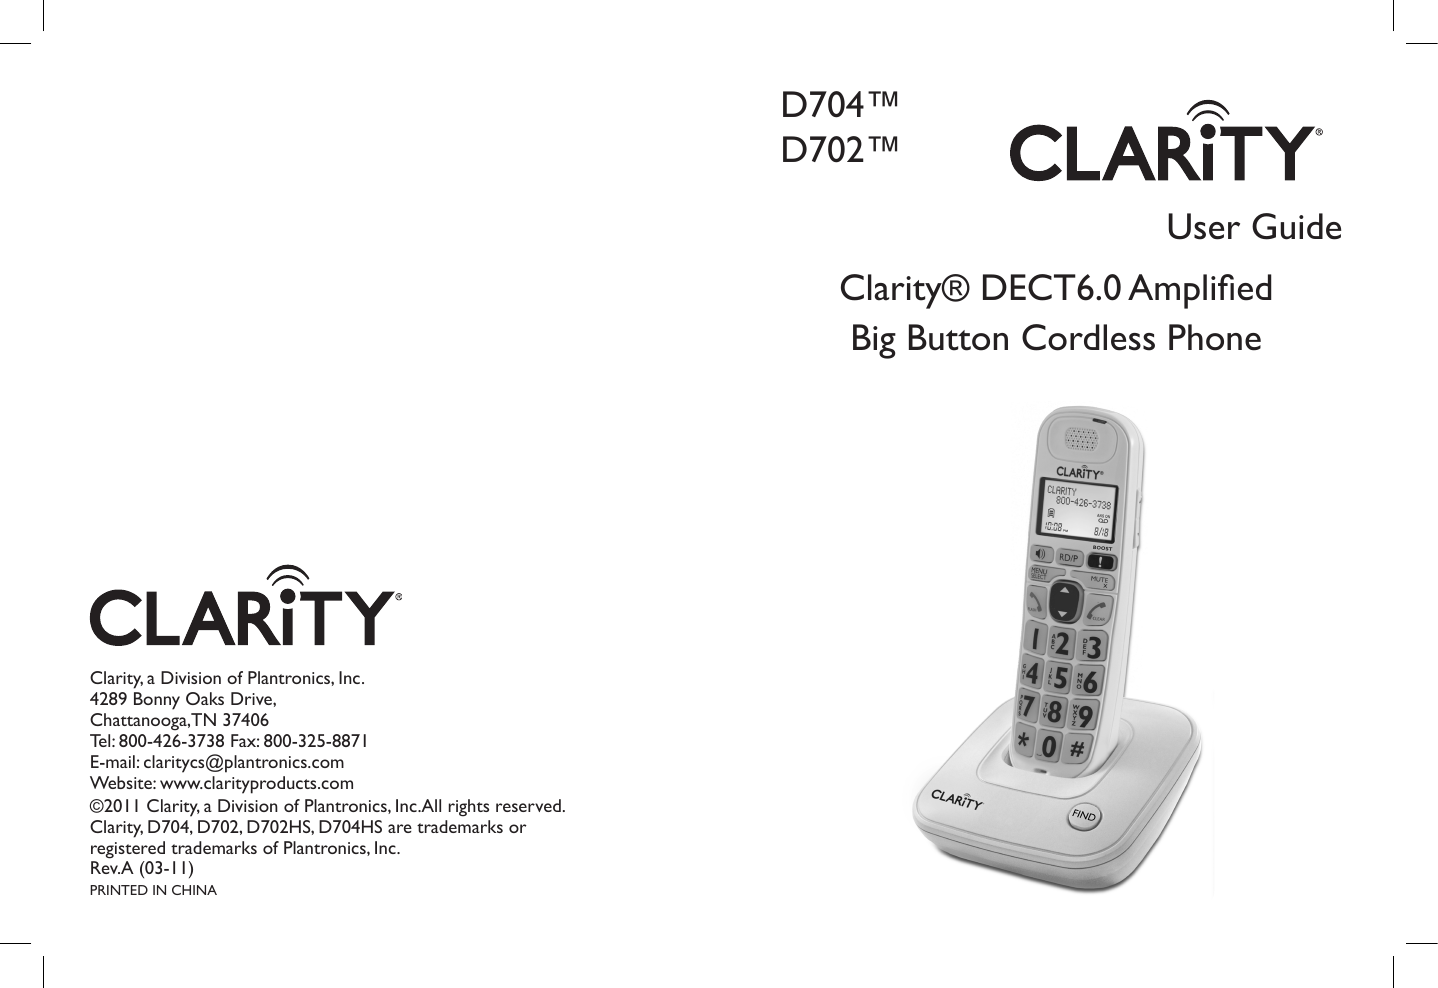 User GuideClarity, a Division of Plantronics, Inc.4289 Bonny Oaks Drive,Chattanooga,TN 37406Tel: 800-426-3738 Fax: 800-325-8871E-mail: claritycs@plantronics.com Website: www.clarityproducts.com©2011 Clarity, a Division of Plantronics, Inc.All rights reserved. Clarity, D704, D702, D702HS, D704HS are trademarks or registered trademarks of Plantronics, Inc.Rev.A (03-11)PRINTED IN CHINAD704™D702™Clarity® DECT6.0 Amplied Big Button Cordless Phone